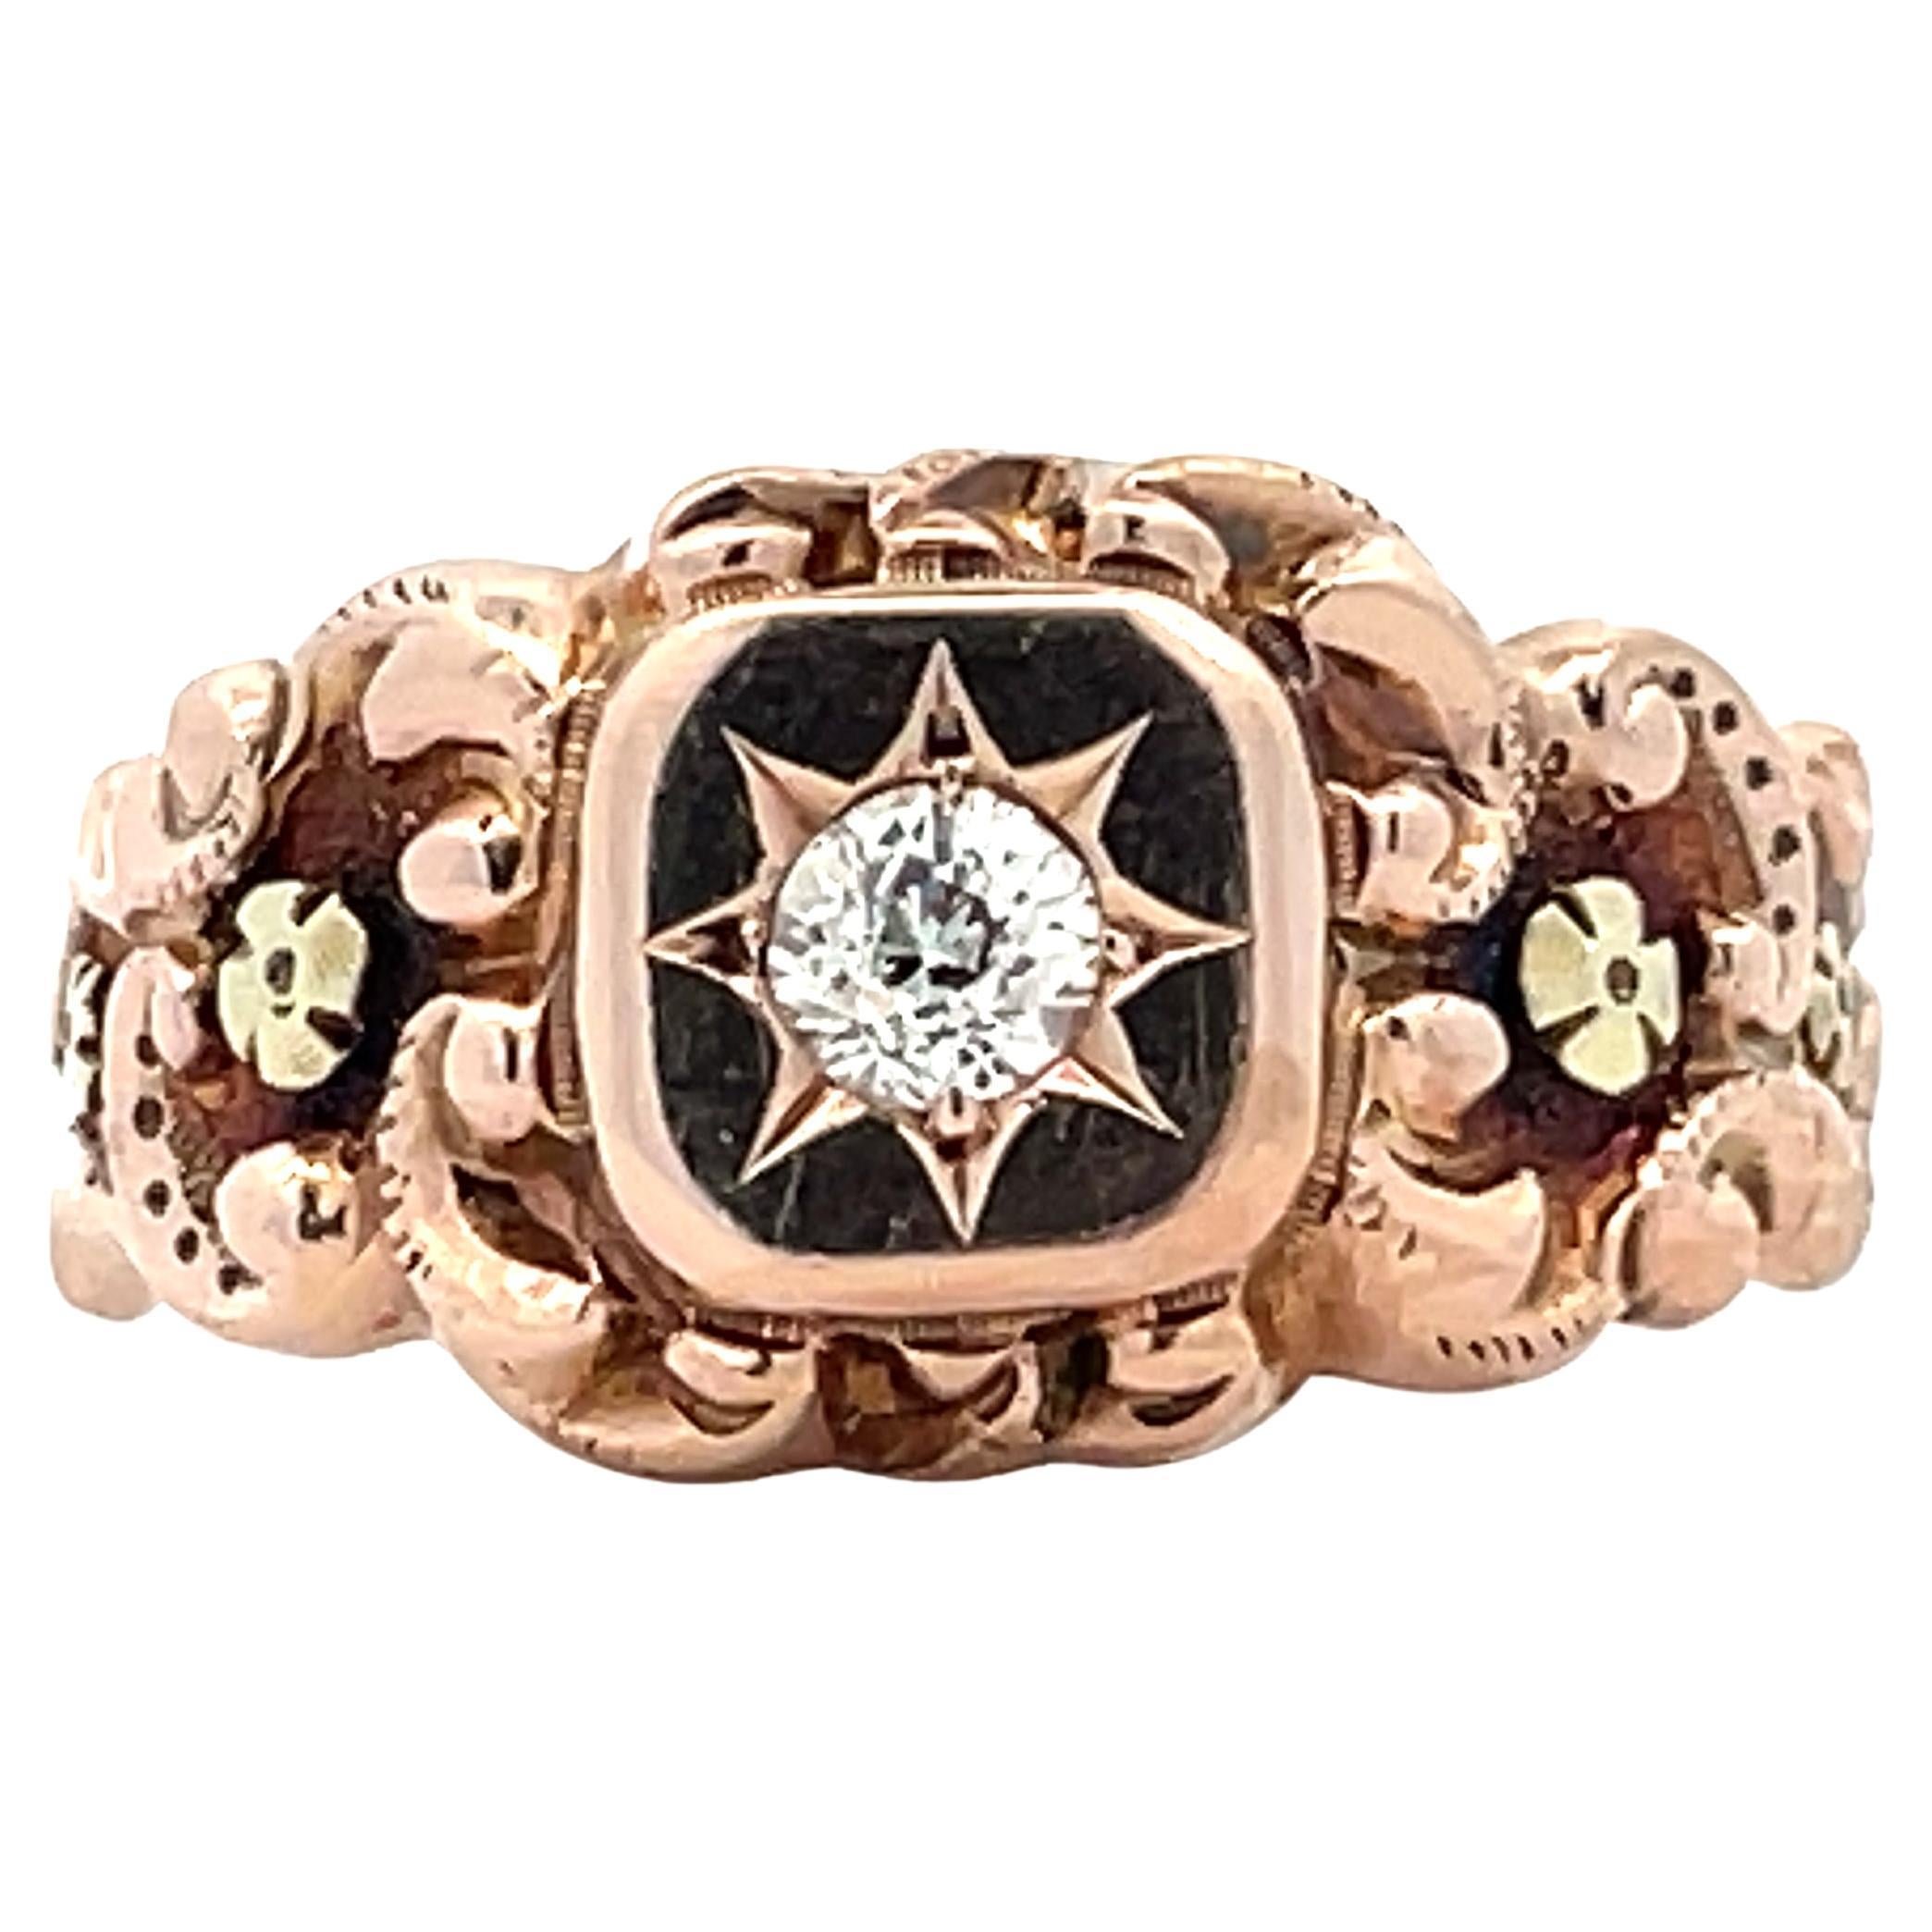 1880 14K Rose Gold Victorian Ring & Applied Green Gold Florets with Euro Cut DIA For Sale